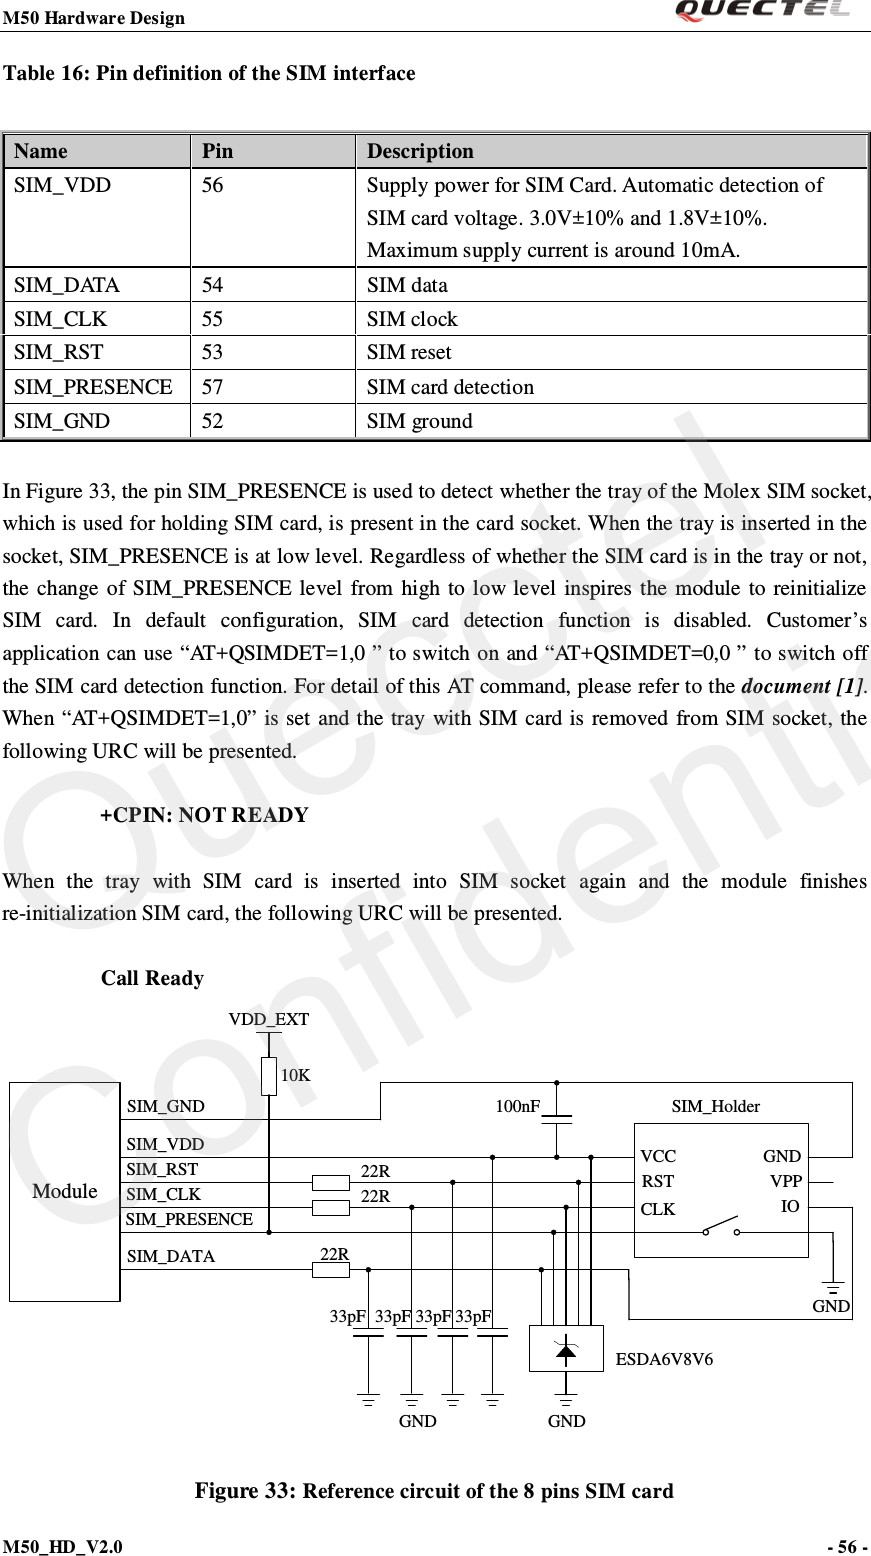 M50 Hardware Design                                                                M50_HD_V2.0                                                                      - 56 -   Table 16: Pin definition of the SIM interface  In Figure 33, the pin SIM_PRESENCE is used to detect whether the tray of the Molex SIM socket, which is used for holding SIM card, is present in the card socket. When the tray is inserted in the socket, SIM_PRESENCE is at low level. Regardless of whether the SIM card is in the tray or not, the change of SIM_PRESENCE level from high to low level inspires the module to reinitialize SIM card. In default configuration, SIM card detection function is disabled. Customer’s application can use “AT+QSIMDET=1,0 ” to switch on and “AT+QSIMDET=0,0 ” to switch off the SIM card detection function. For detail of this AT command, please refer to the document [1]. When “AT+QSIMDET=1,0” is set and the tray with SIM card is removed from SIM socket, the following URC will be presented.       +CPIN: NOT READY  When the tray with SIM card is inserted into SIM socket again and the module finishes        re-initialization SIM card, the following URC will be presented.      Call Ready ModuleSIM_VDDSIM_GNDSIM_RSTSIM_CLKSIM_DATASIM_PRESENCE22R22R22RVDD_EXT10K100nF SIM_HolderGNDGNDESDA6V8V633pF33pF 33pF 33pFVCCRSTCLK IOVPPGNDGND Figure 33: Reference circuit of the 8 pins SIM card Name Pin Description SIM_VDD 56  Supply power for SIM Card. Automatic detection of SIM card voltage. 3.0V±10% and 1.8V±10%. Maximum supply current is around 10mA. S I M _ D ATA   54  SIM data SIM_CLK  55  SIM clock SIM_RST 53 SIM reset SIM_PRESENCE 57 SIM card detection SIM_GND 52 SIM ground Quecctel Confidential